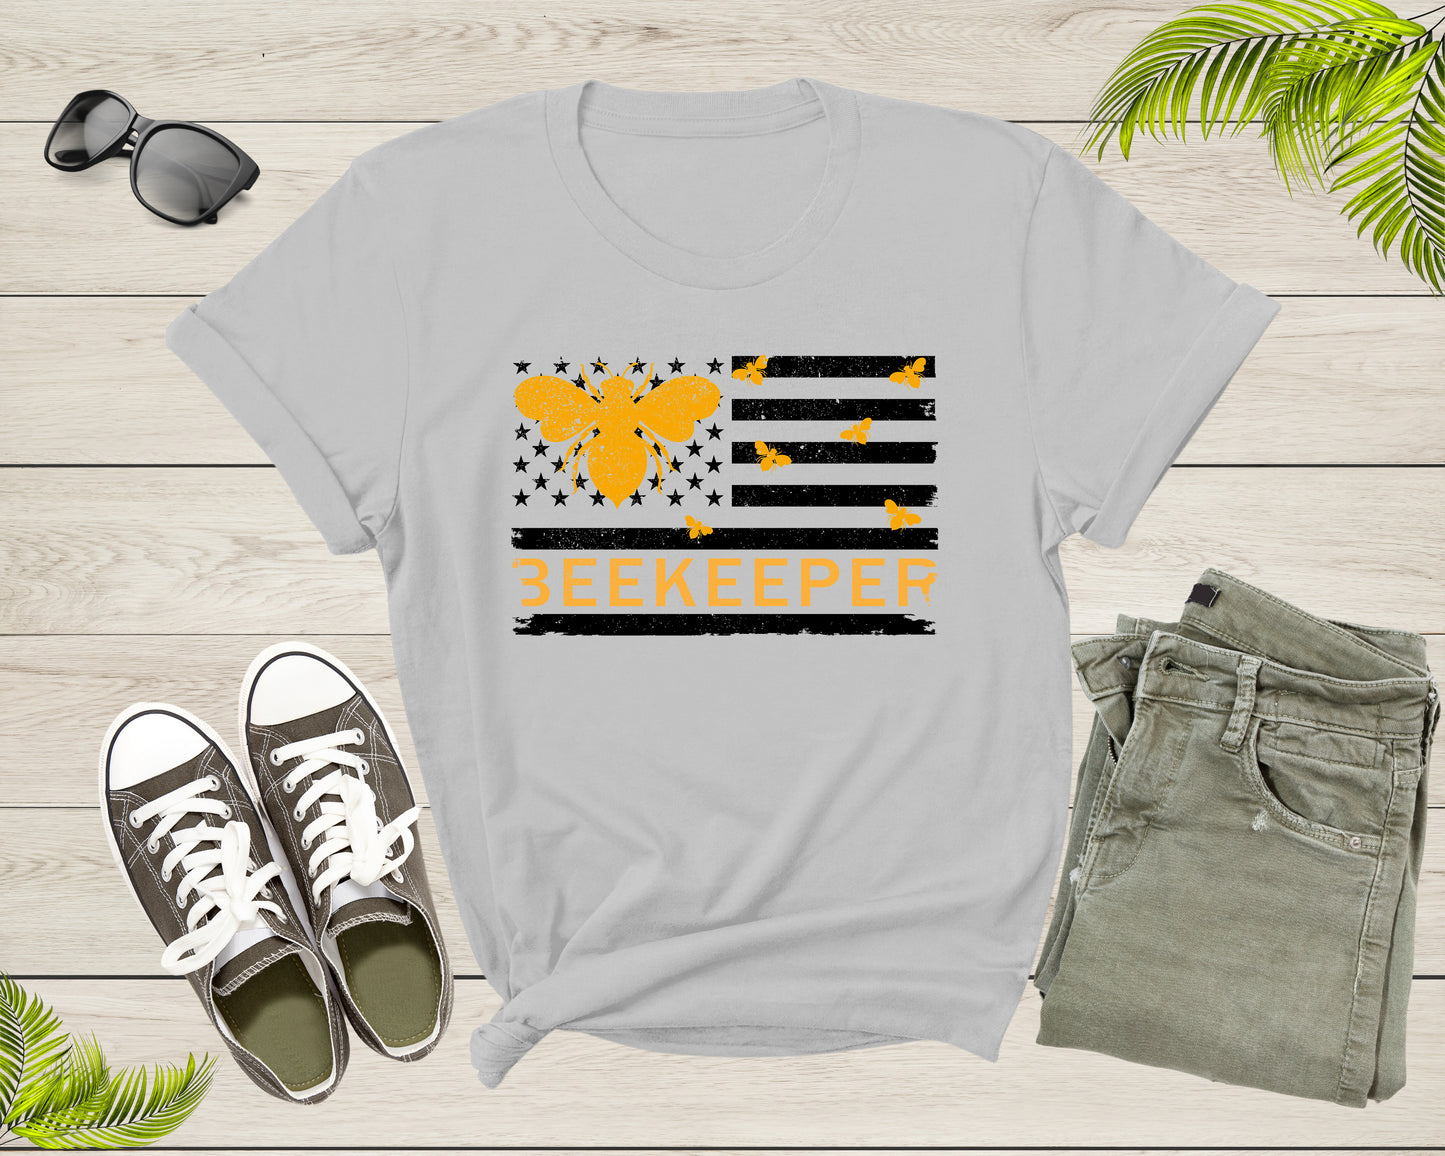 Honey Bee Lover Flag Gift for Beekeepers Bumblebee Birthday T-Shirt Save the Bees Shirt Honey Bee Shirt Beekeeper Shirt Bee Lover Shirt